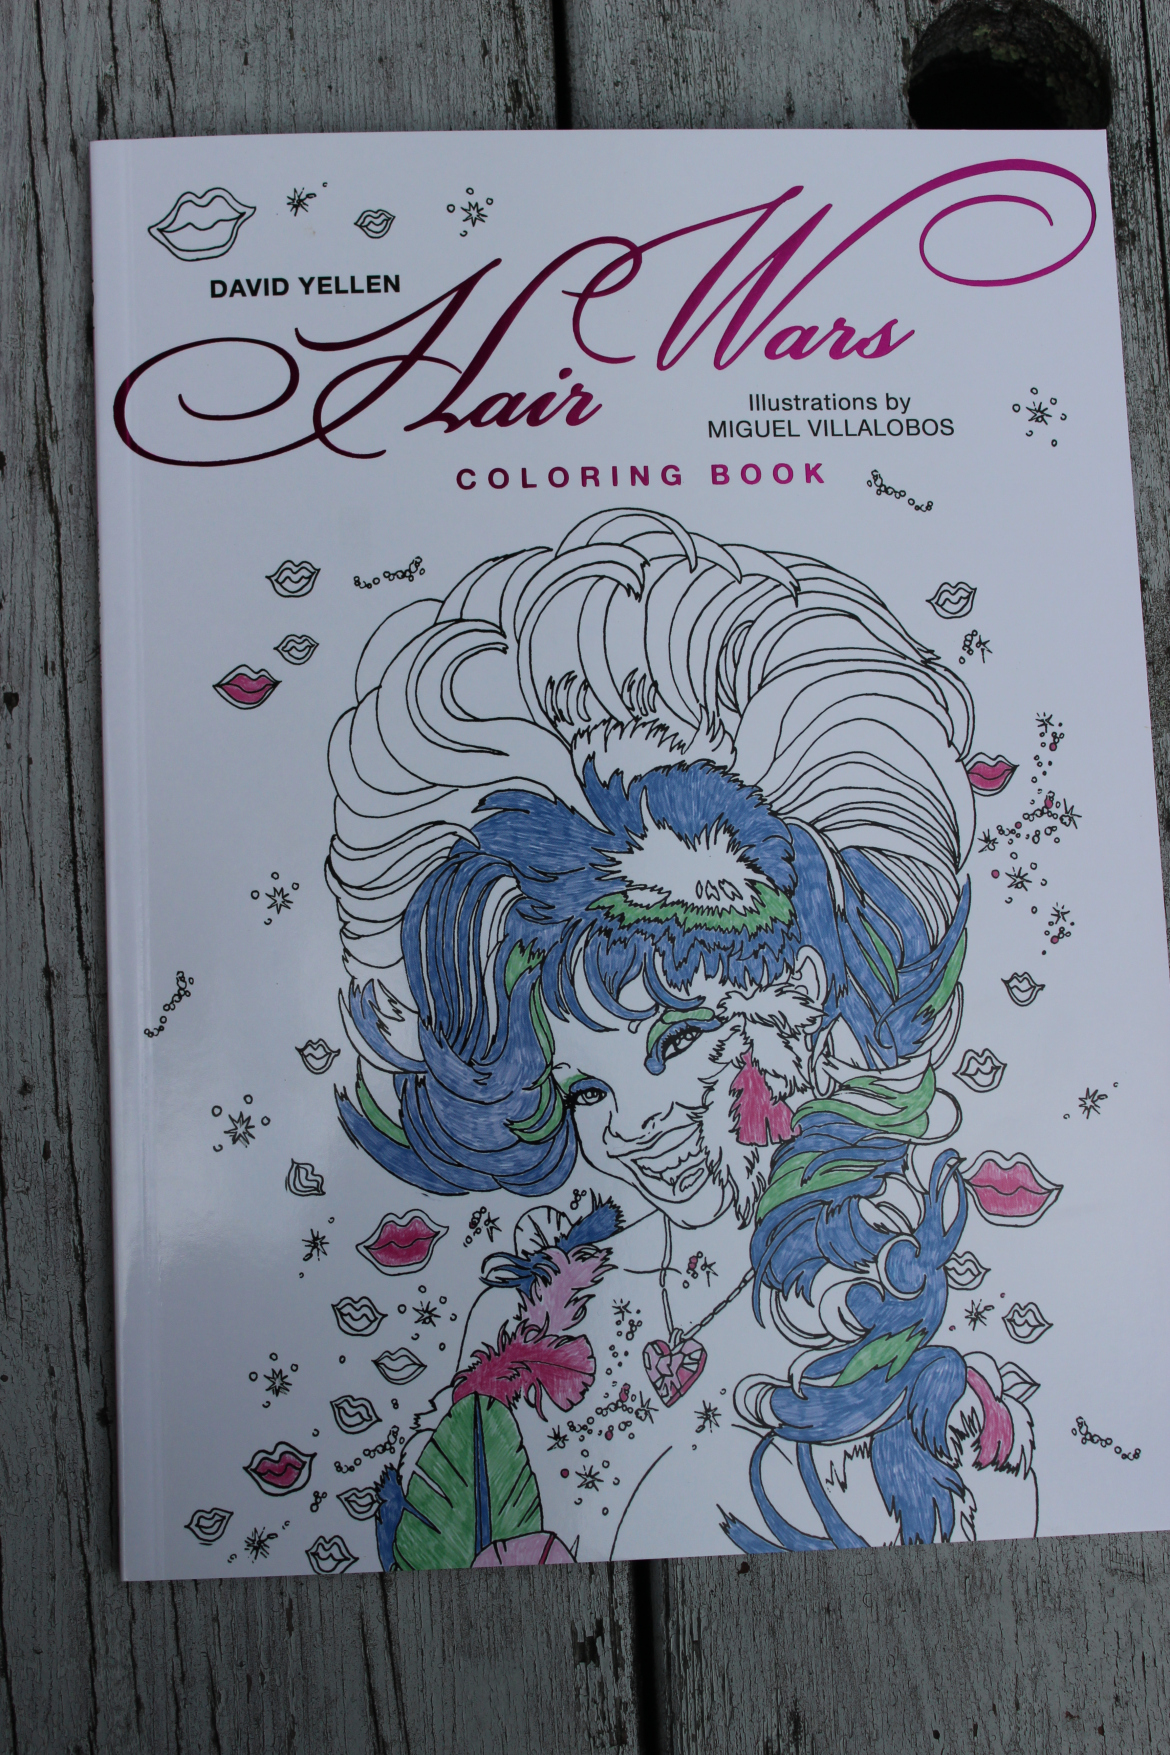 New Adult Coloring Book David Yellen's Hair Wars out Now!